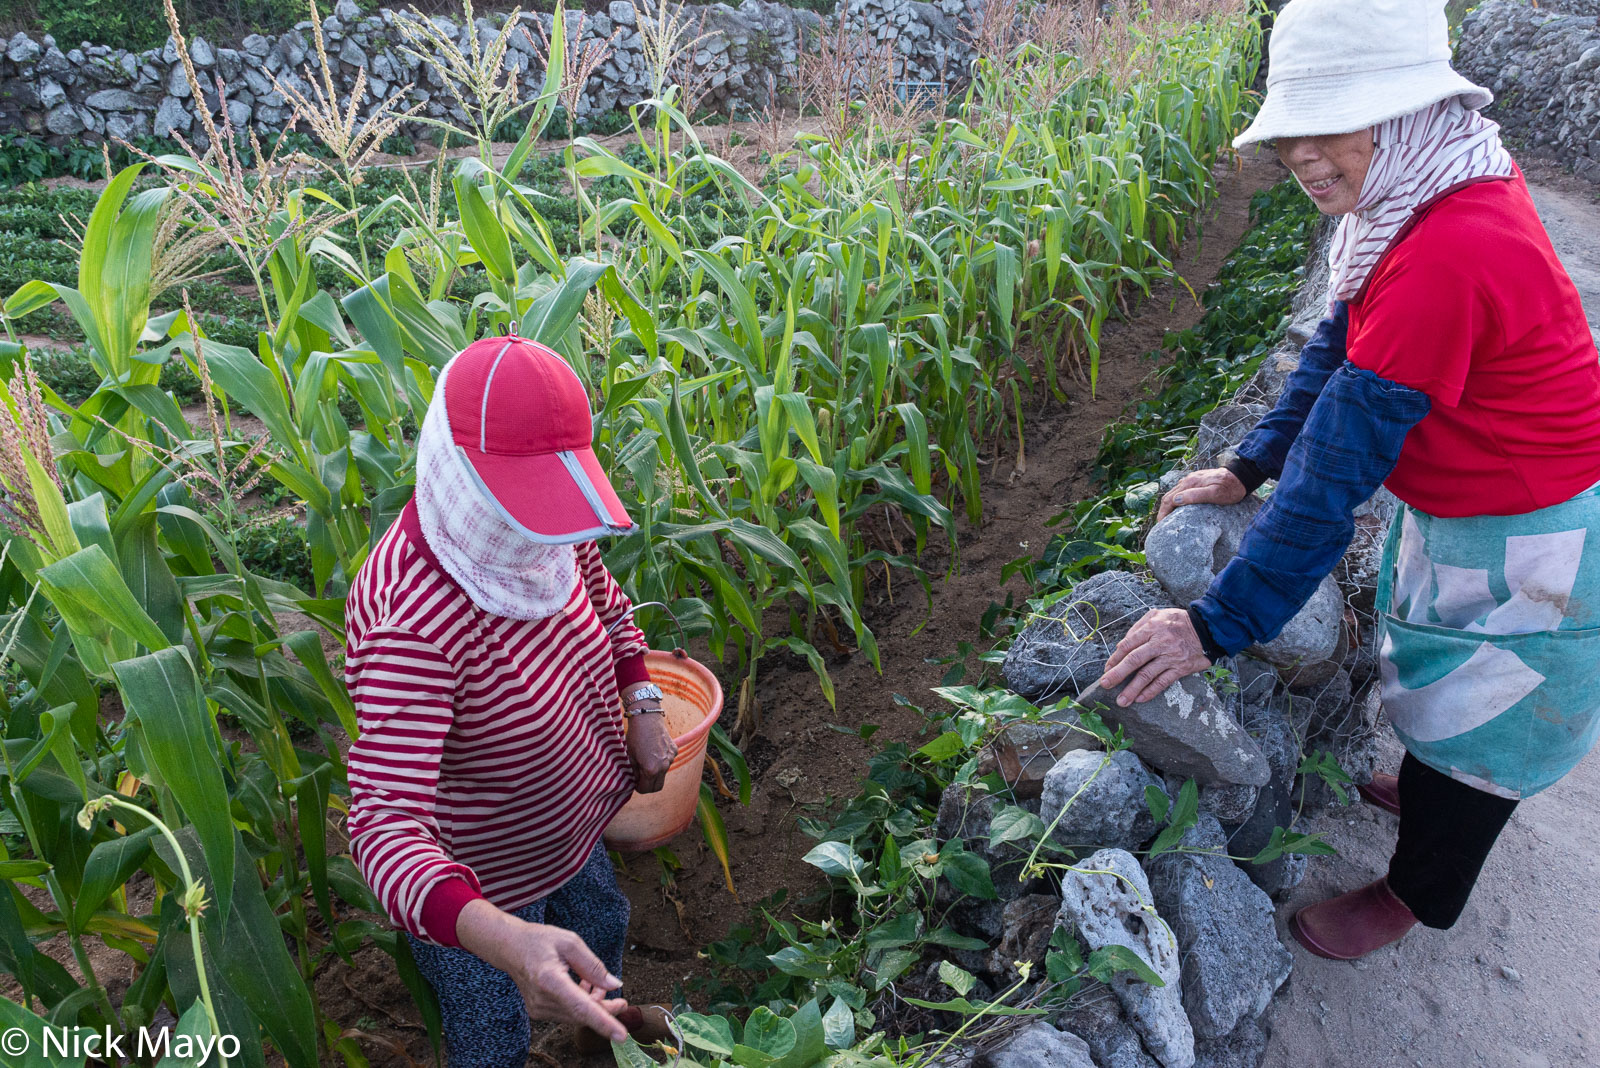 A farmer inspecting her crops of beans and corn in a coral walled field on Wangan.